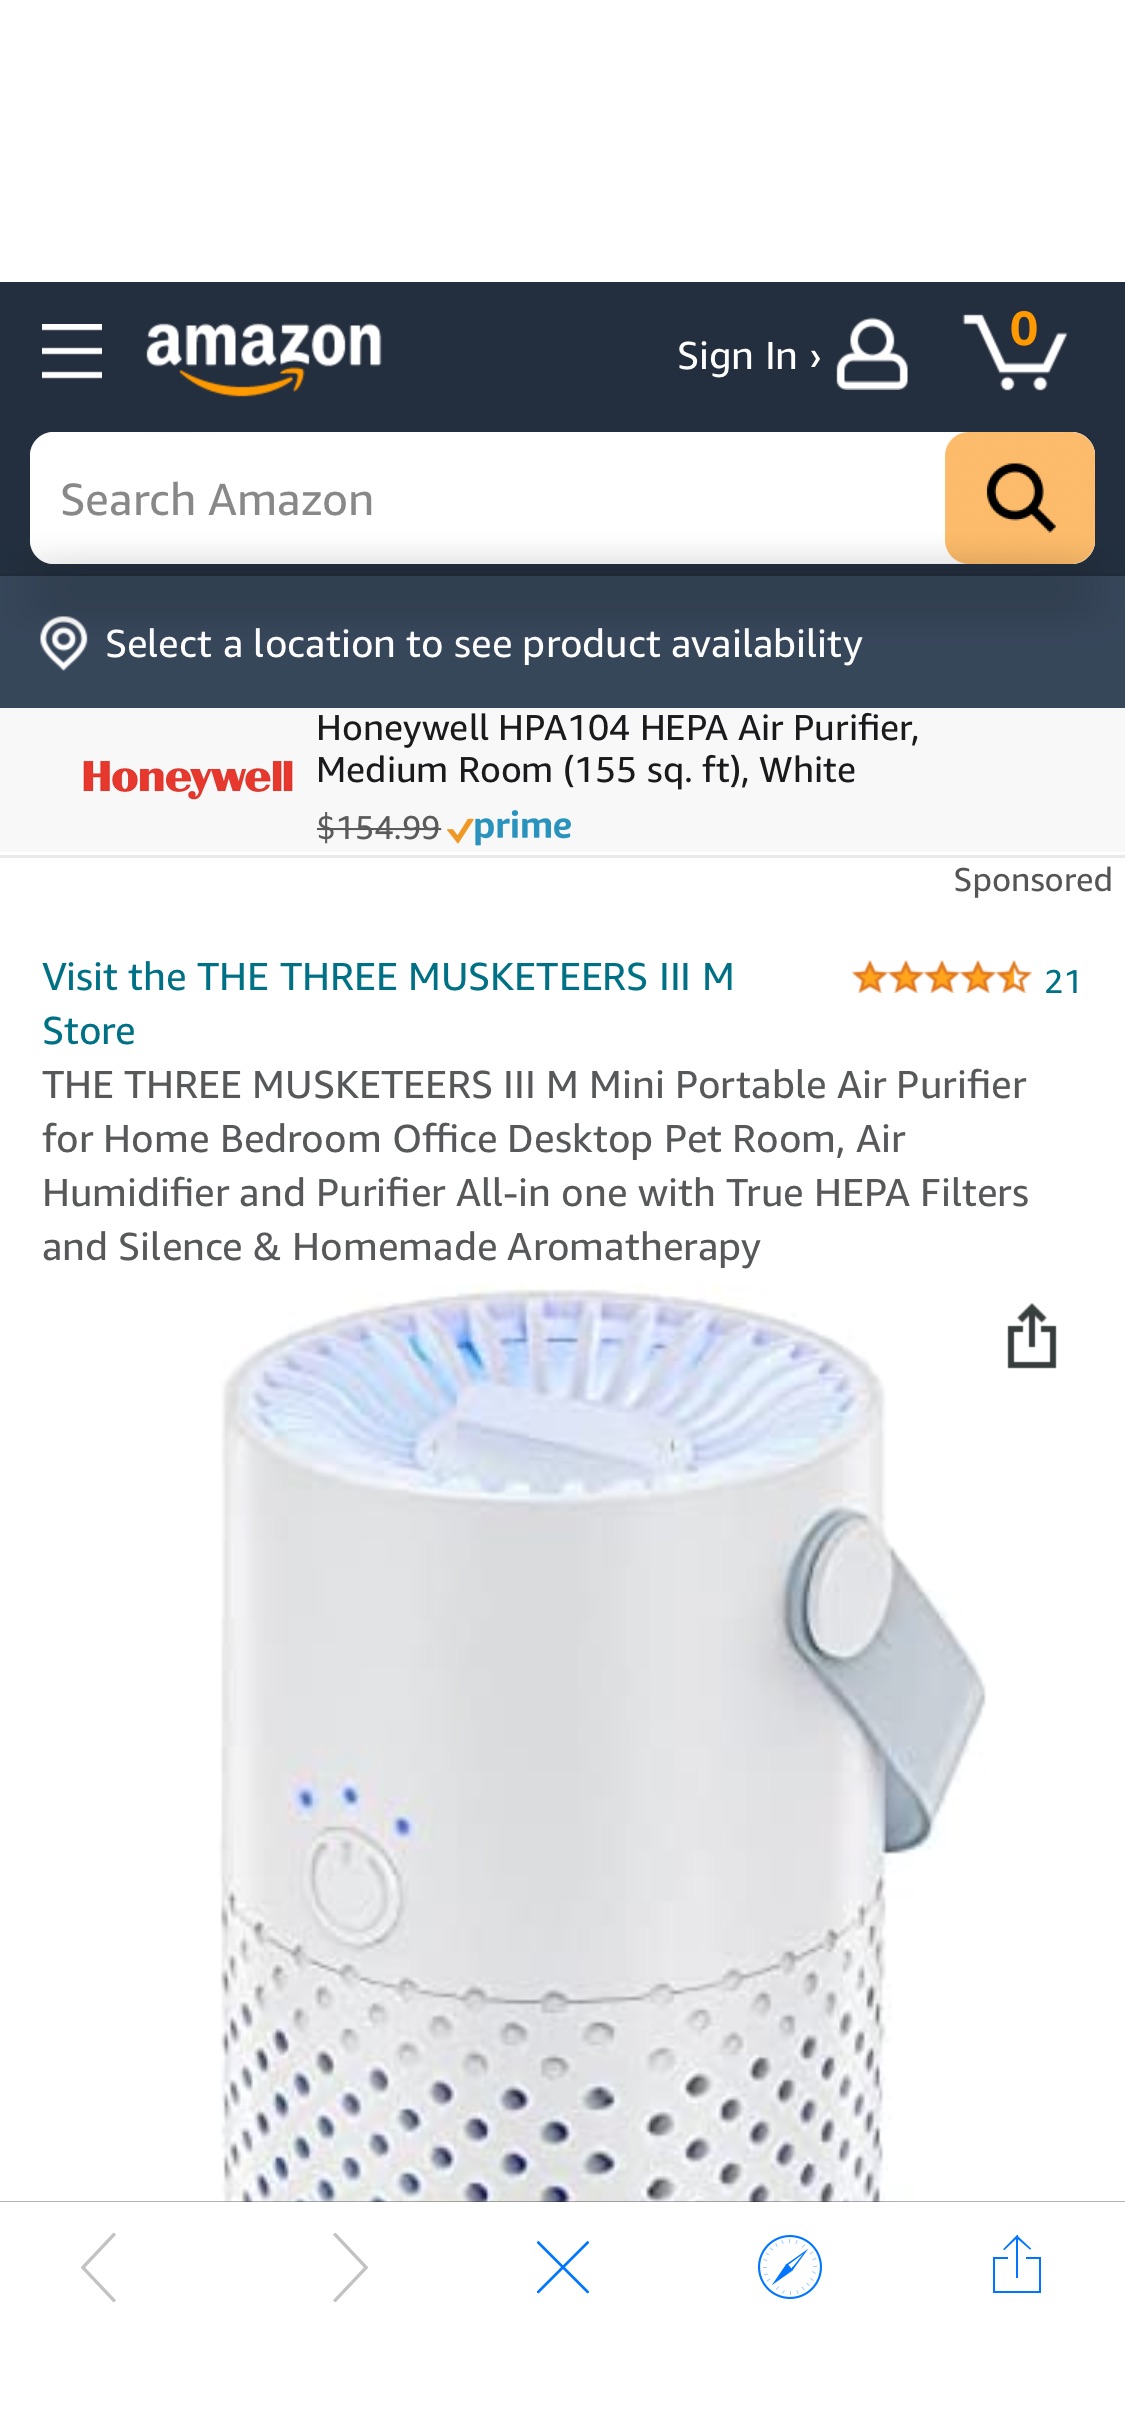 THE THREE MUSKETEERS III M Mini Portable Air Purifier for Home Bedroom Office Desktop Pet Room, Air Humidifier and Purifier All-in one with True HEPA Filters and Silence & Homemade Aromatherapy